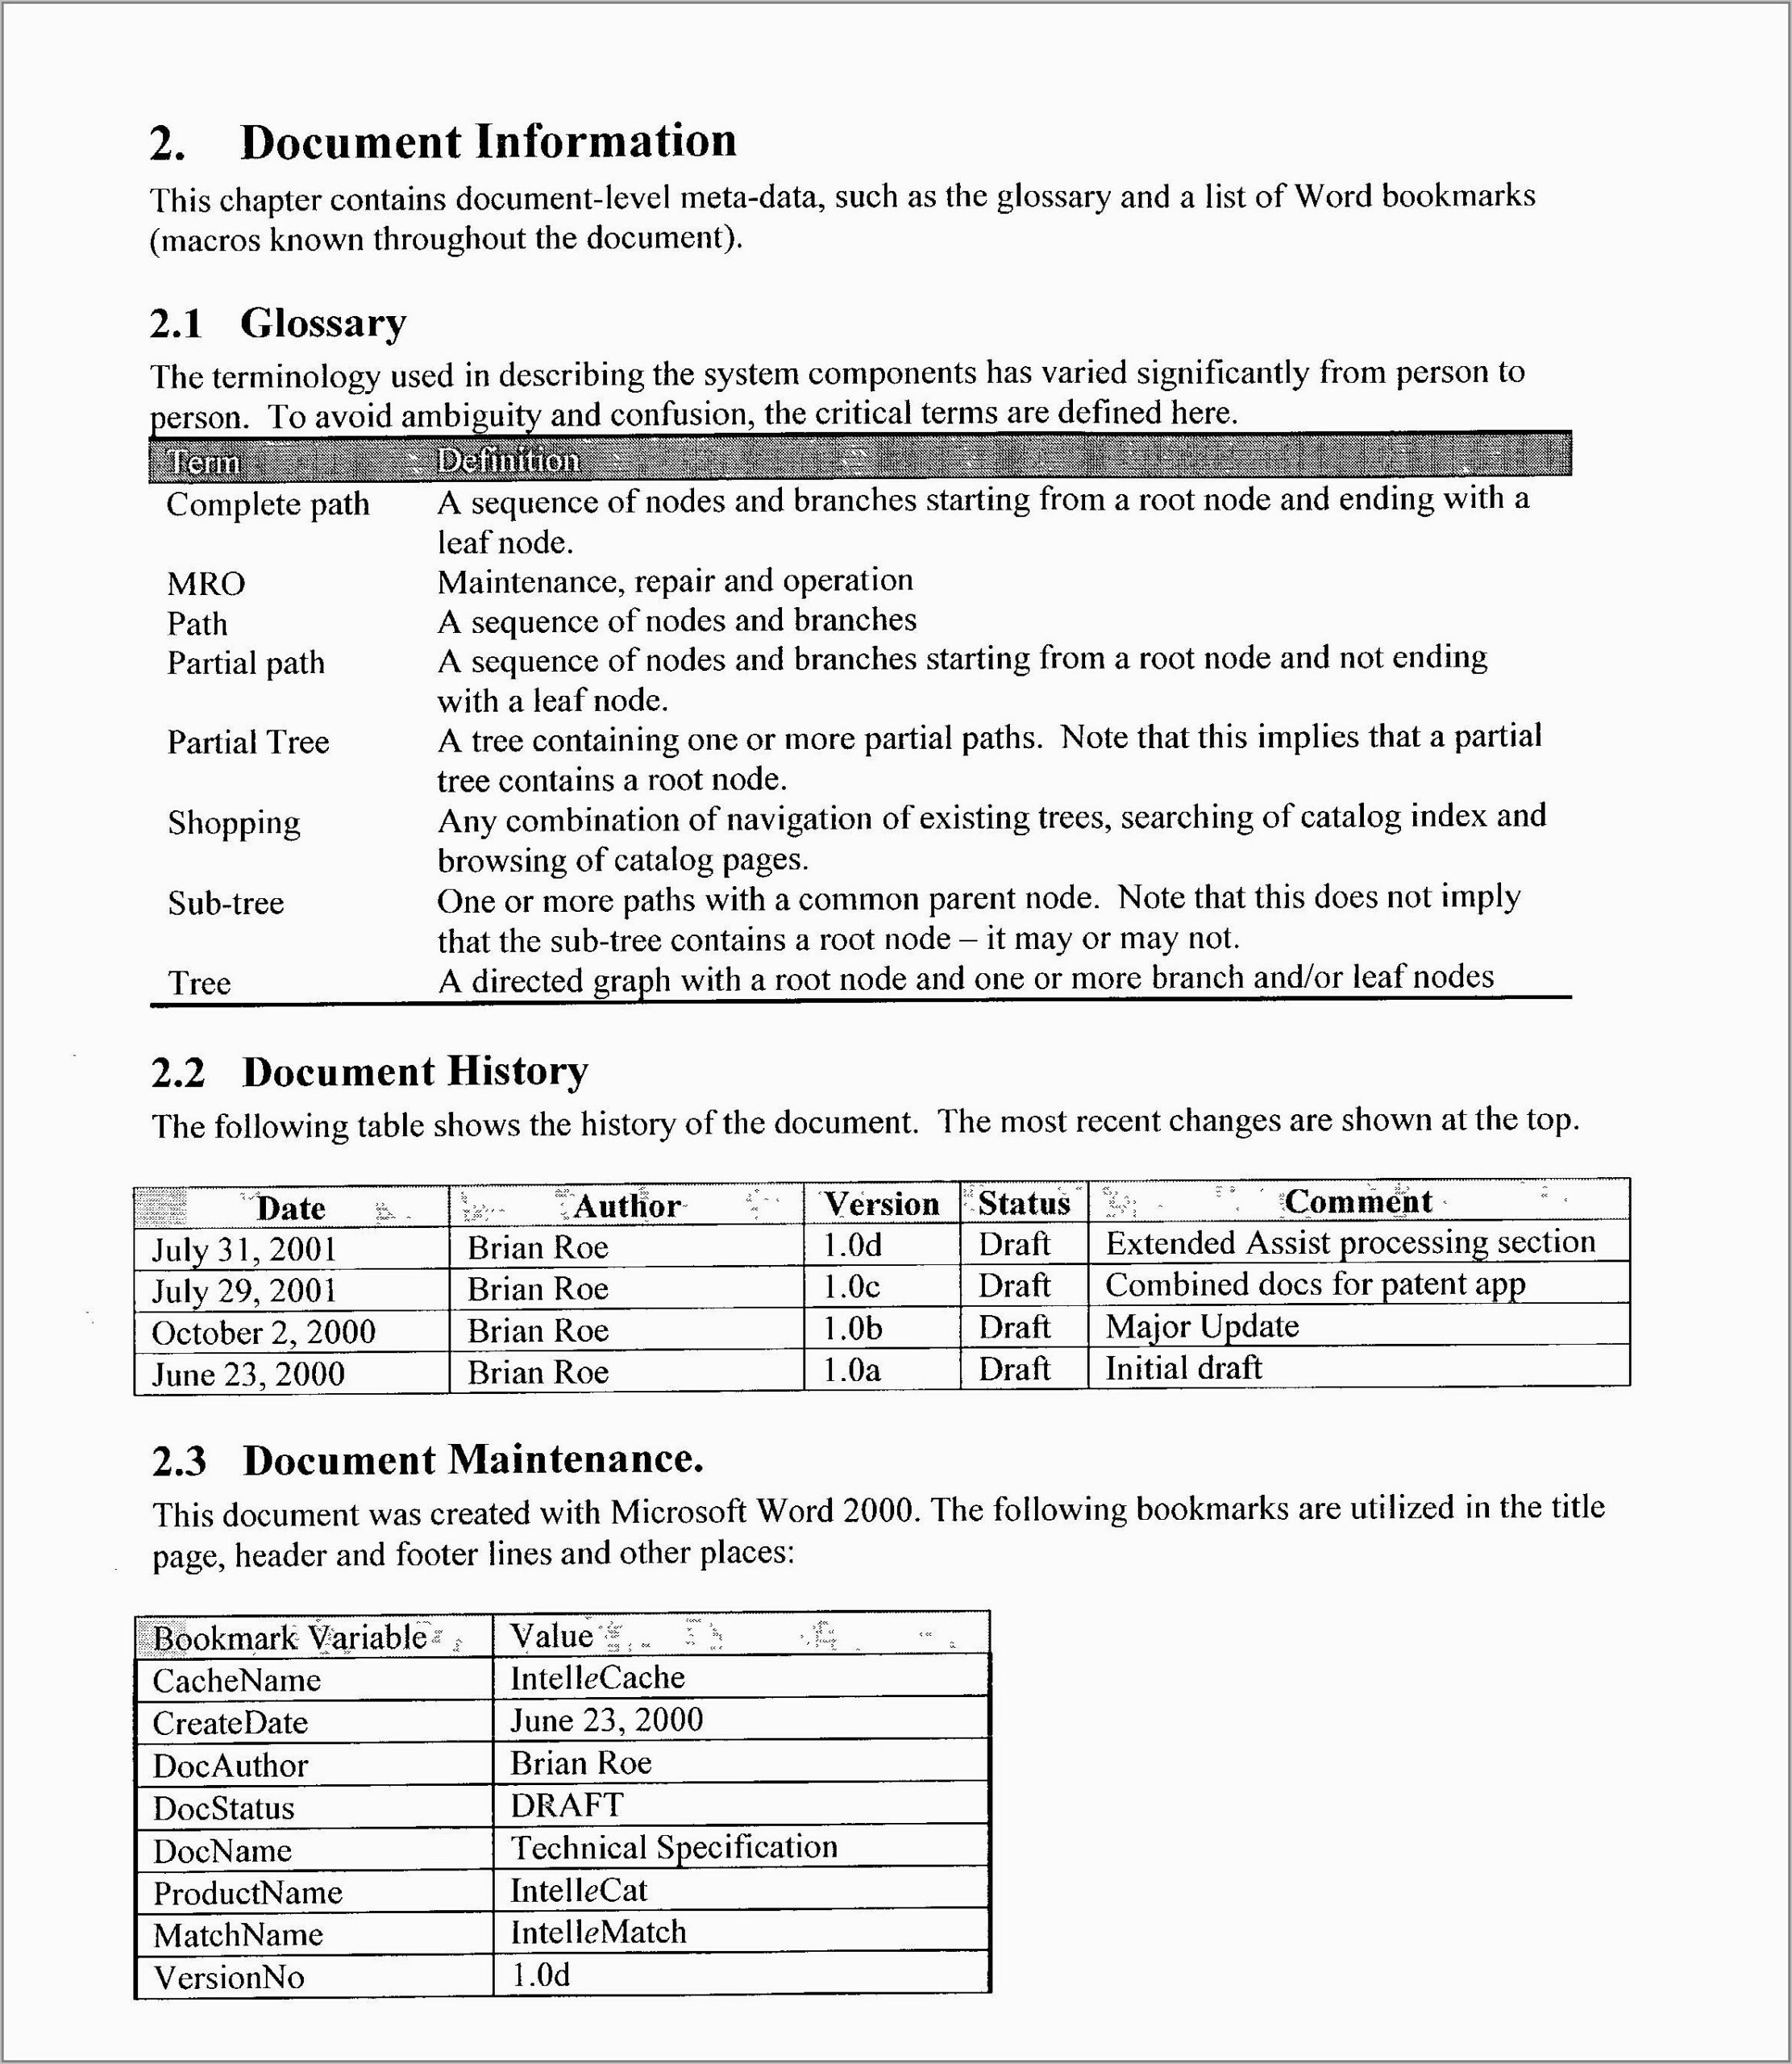 Resume Templates Word Free Download 2017